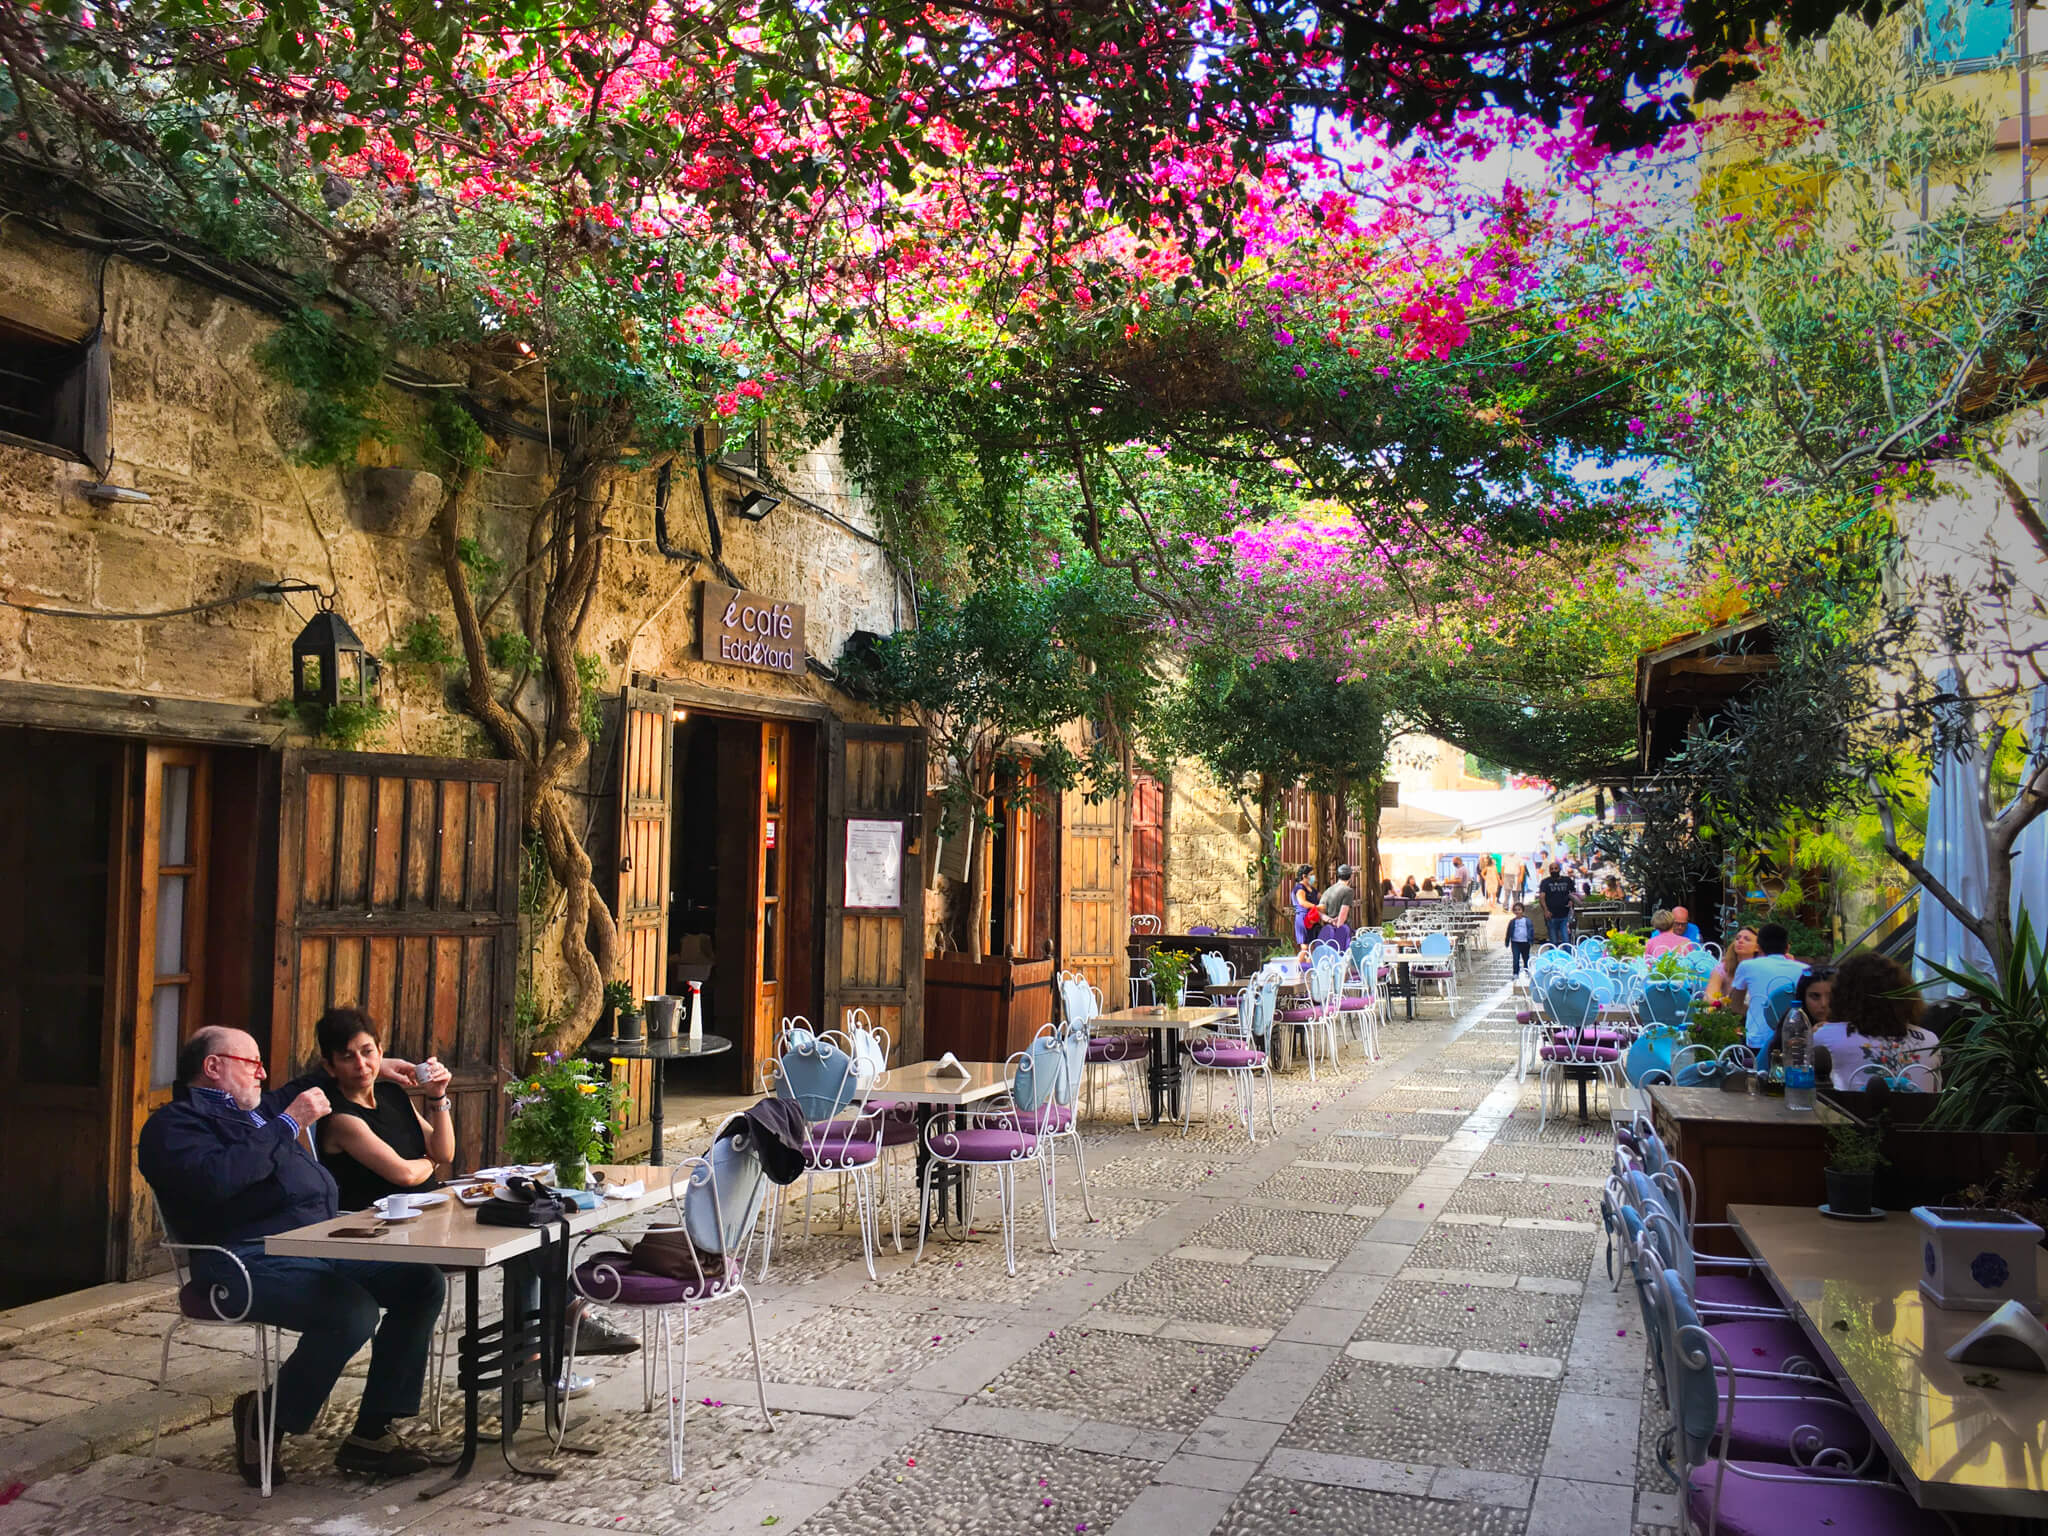 A local restaurant with tables outside on the street and flowers growing above.